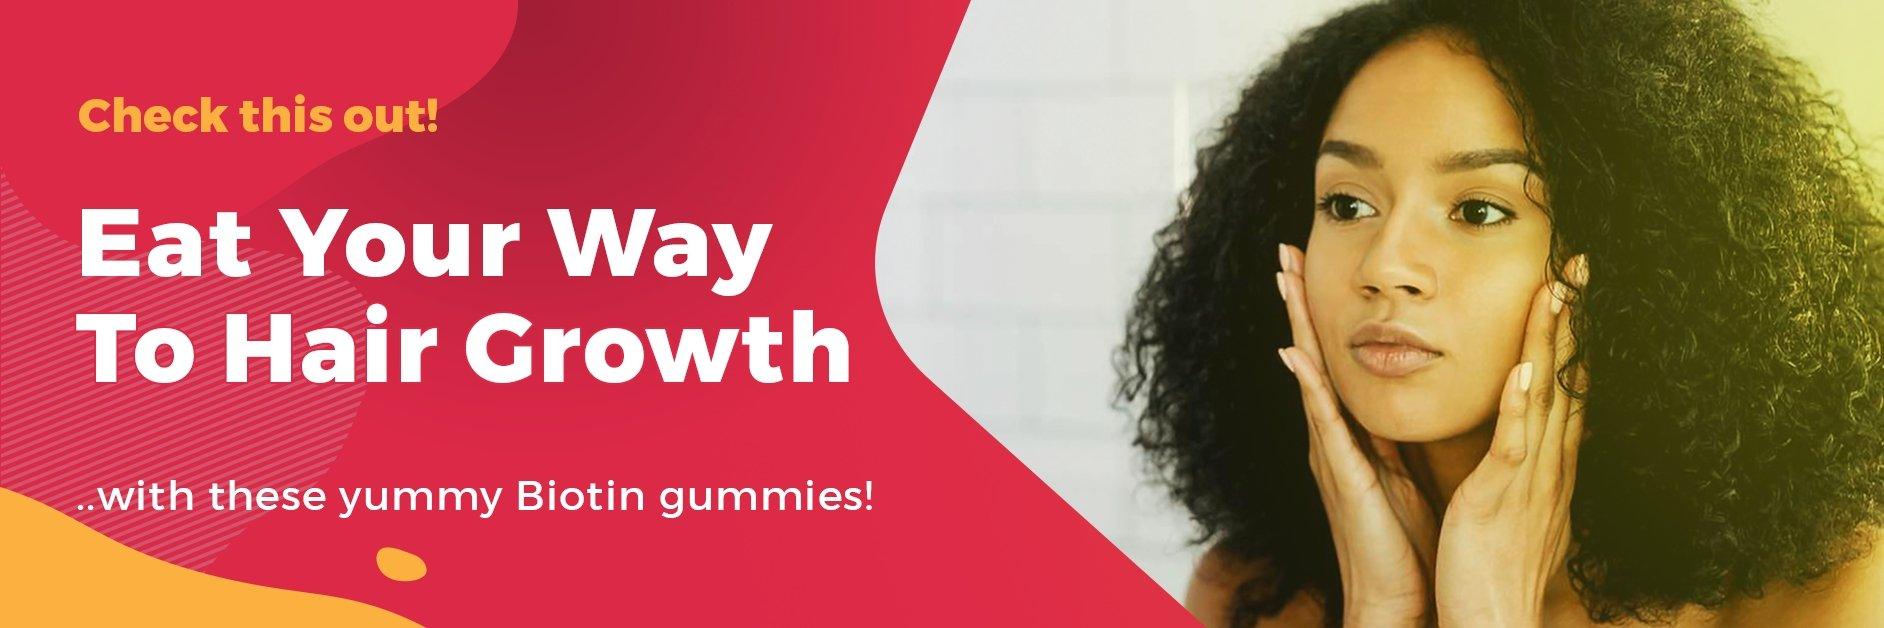 Eat your way to hair growth with these yummy Biotin gummies - GlammedNaturallyOil